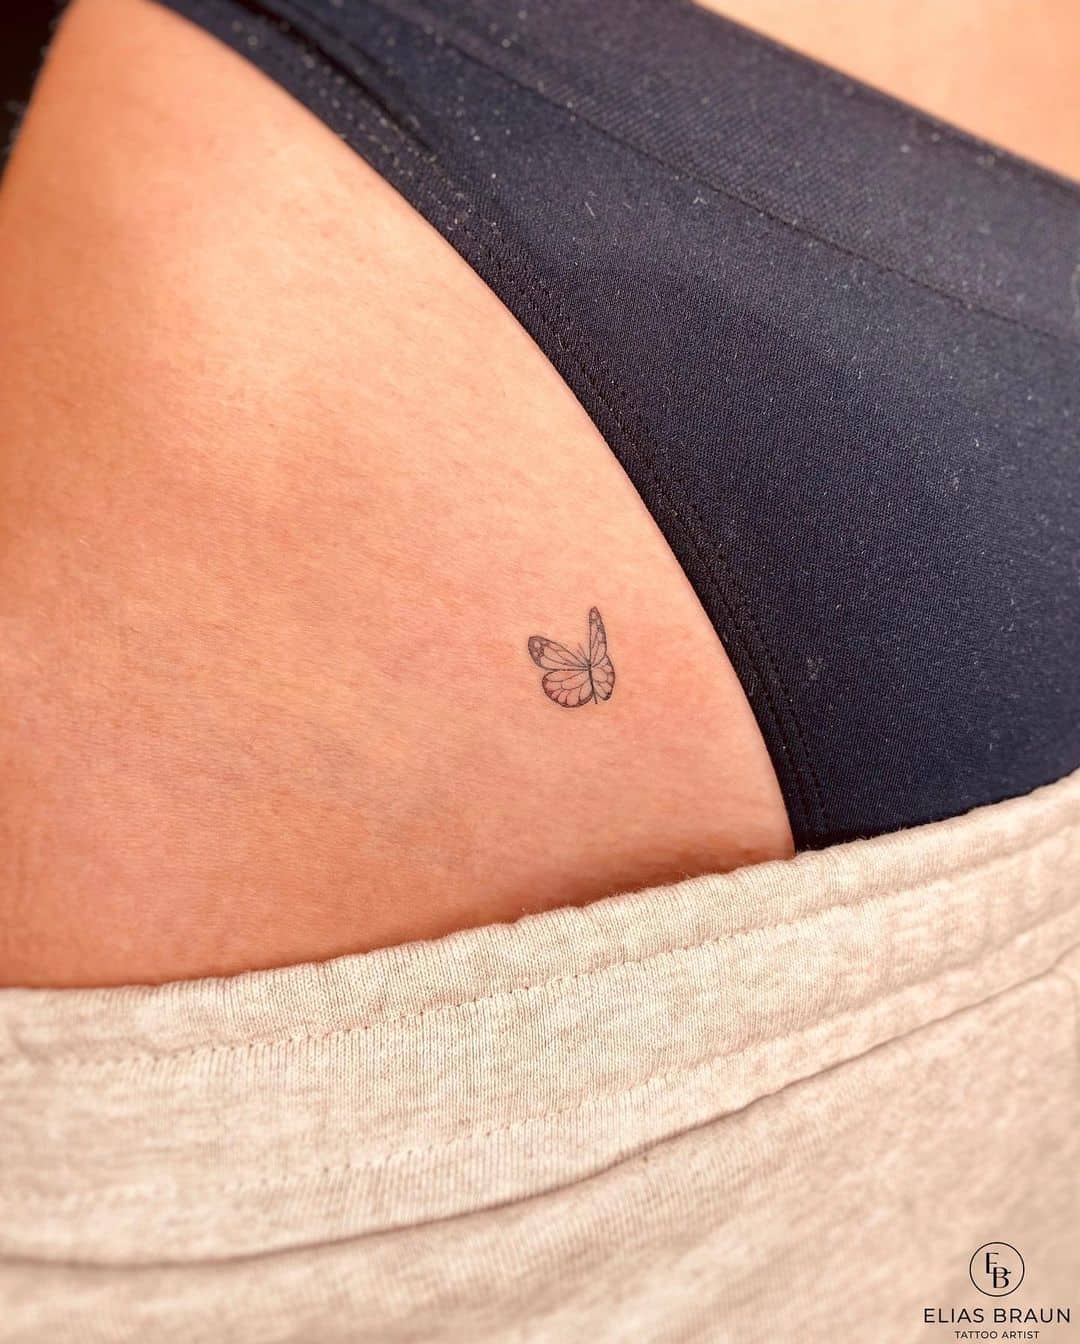 11 Butterfly Hip Tattoo Ideas That Will Blow Your Mind  alexie